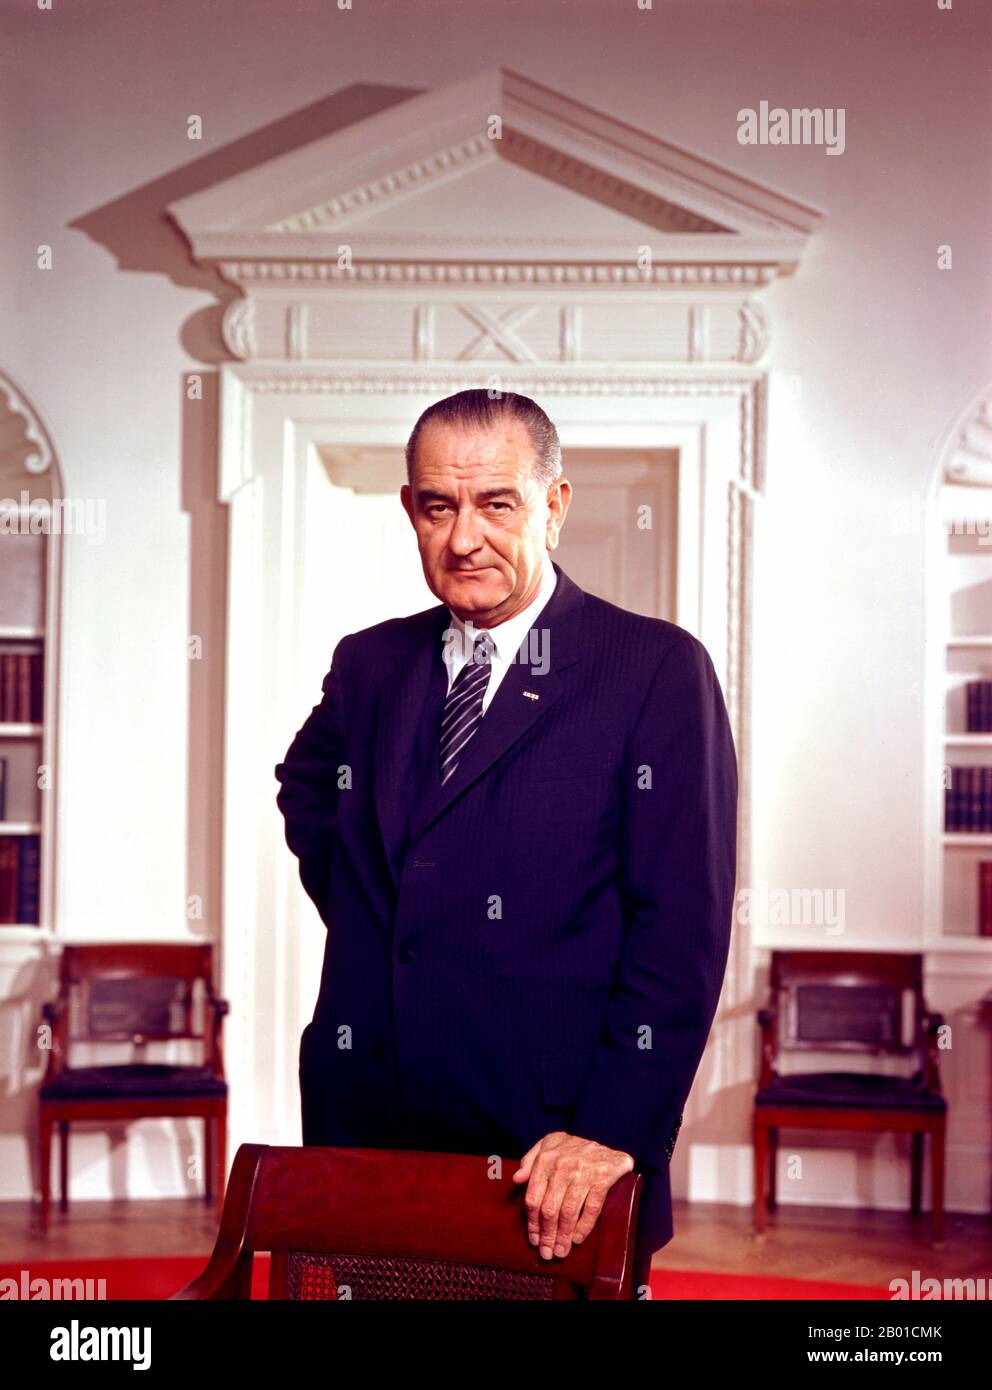 USA: Lyndon Baines Johnson (27 August 1908 - 22 January 1973), 36th President of the United States (1963-1969). Photo by Arnold Newman (1918-2006, public domain), Oval Office, White House, 10 March 1964.  Lyndon Baines Johnson, often referred to as LBJ, was the 36th President of the United States after his service as the 37th Vice President of the United States (1961-1963). He is one of only four people who served in all four elected federal offices of the United States: Representative, Senator, Vice President and President. Stock Photo